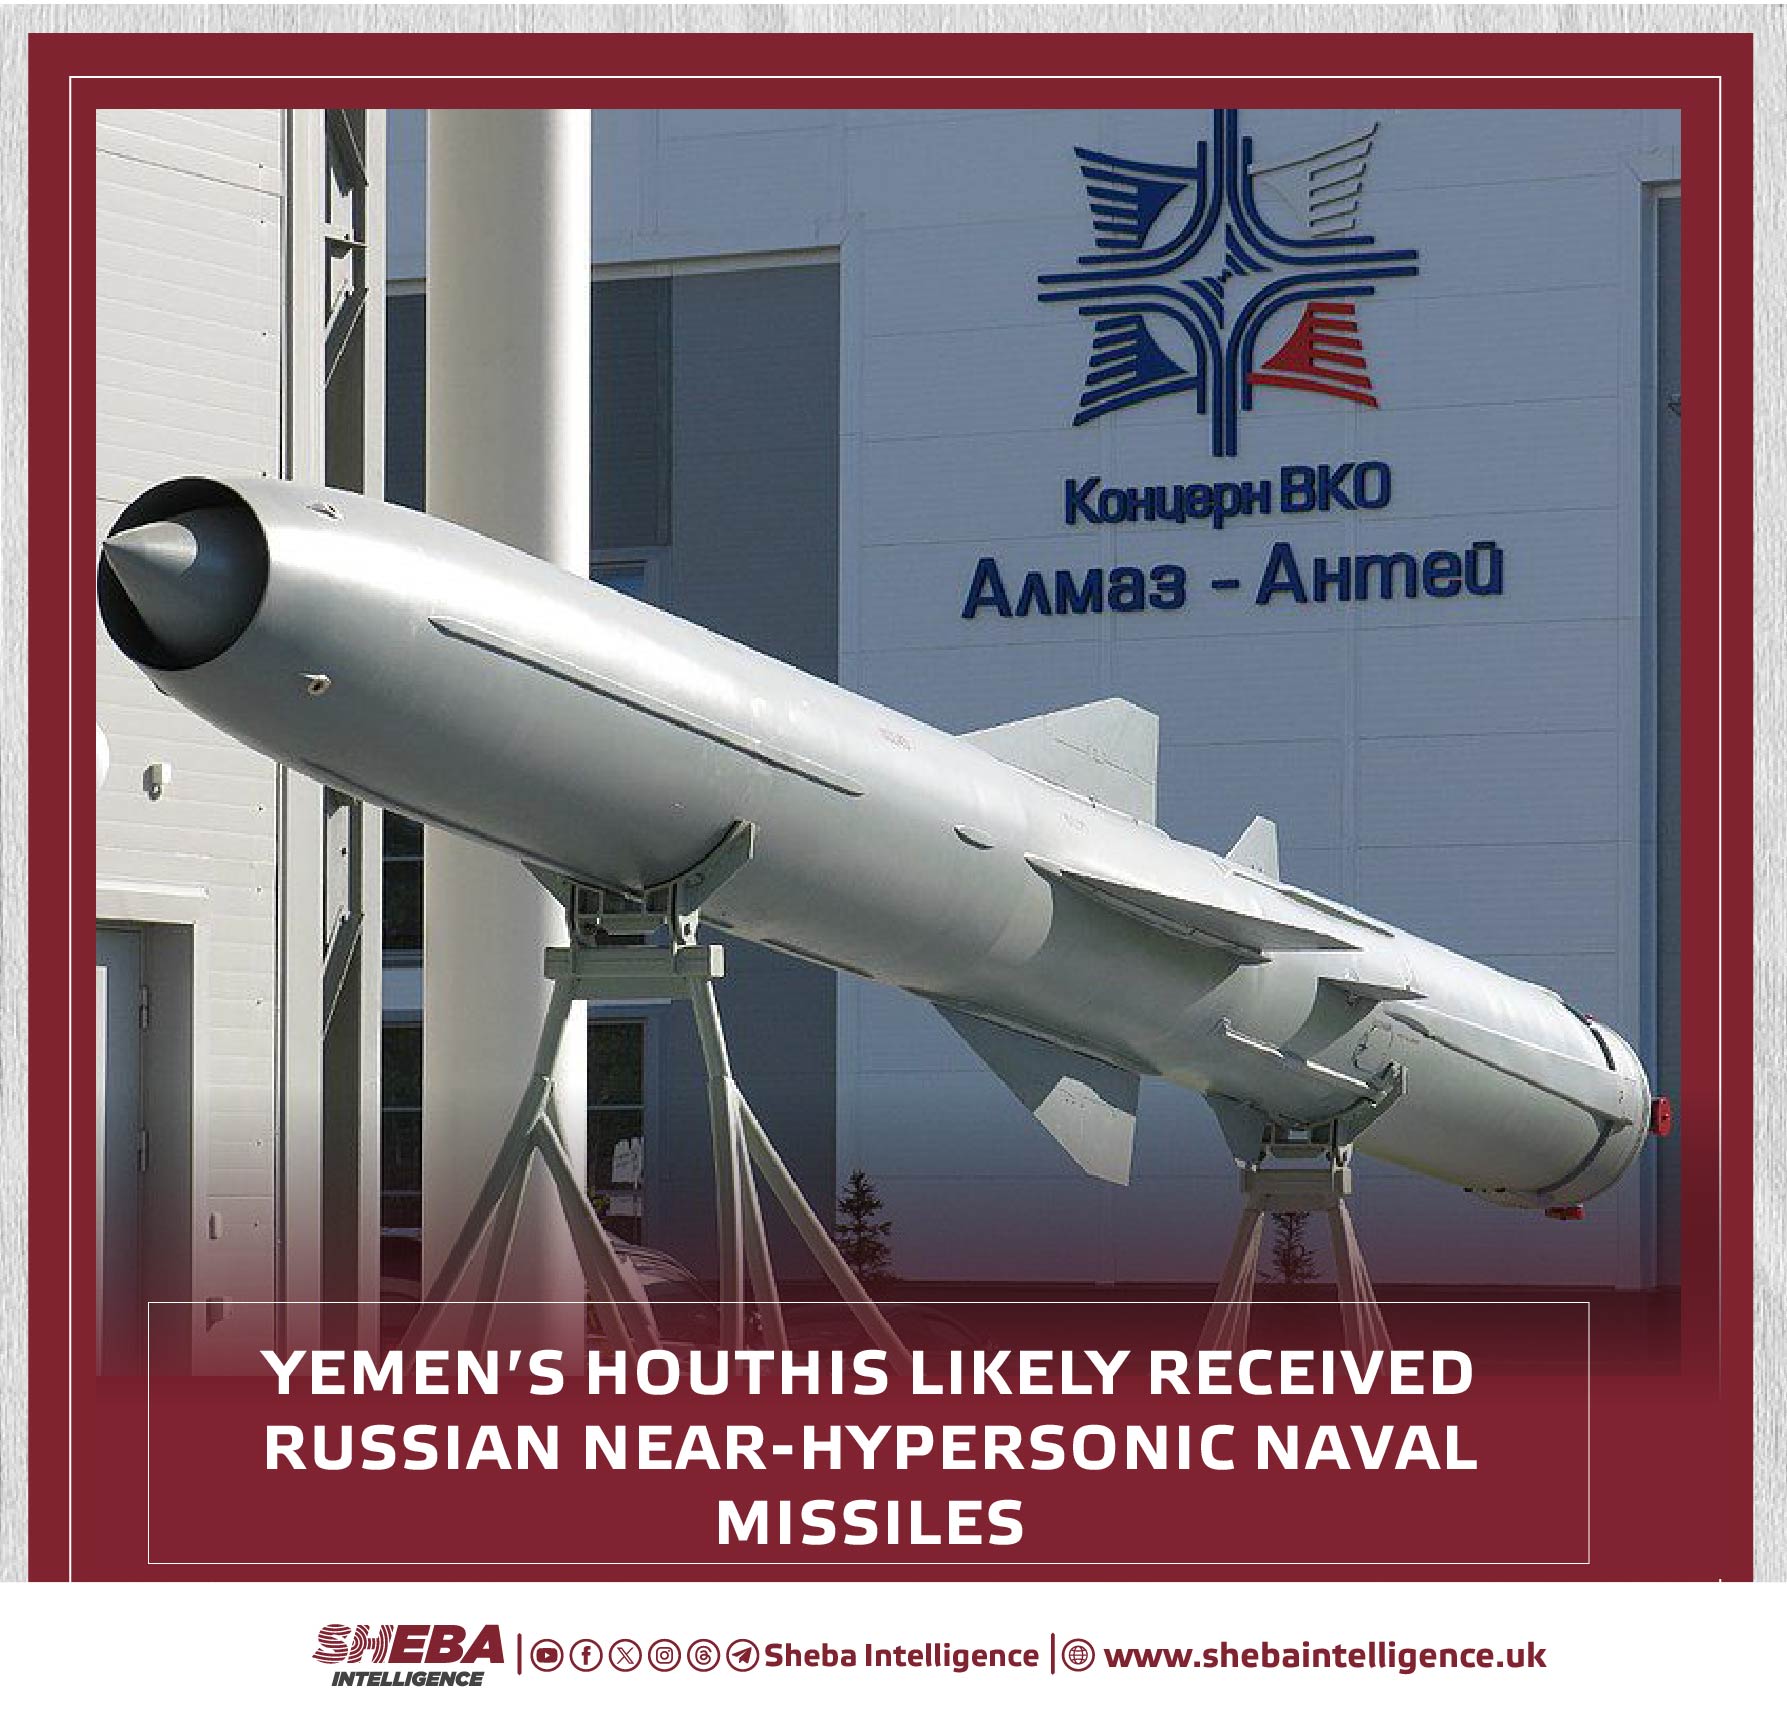 Yemen's Houthis Likely Received Russian Near-Hypersonic Naval Missiles